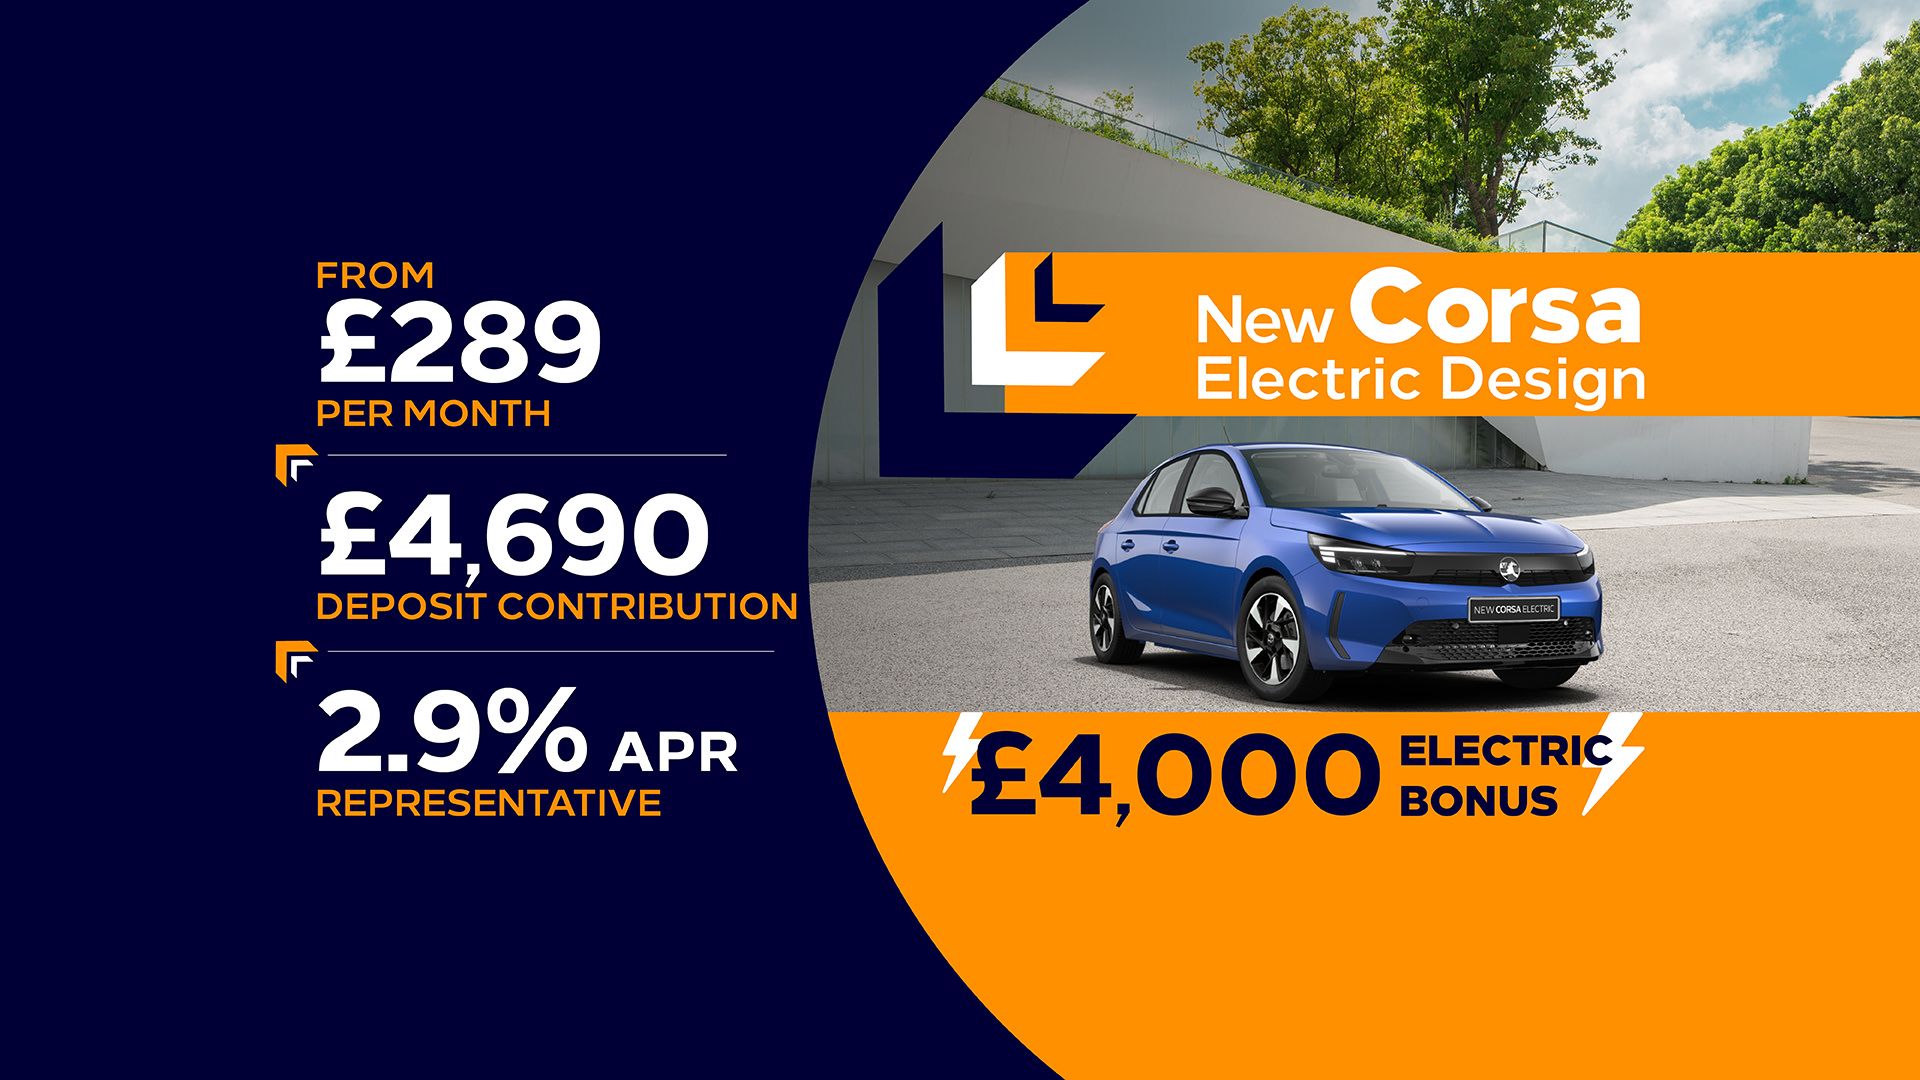 Vauxhall Corsa Electric Offer